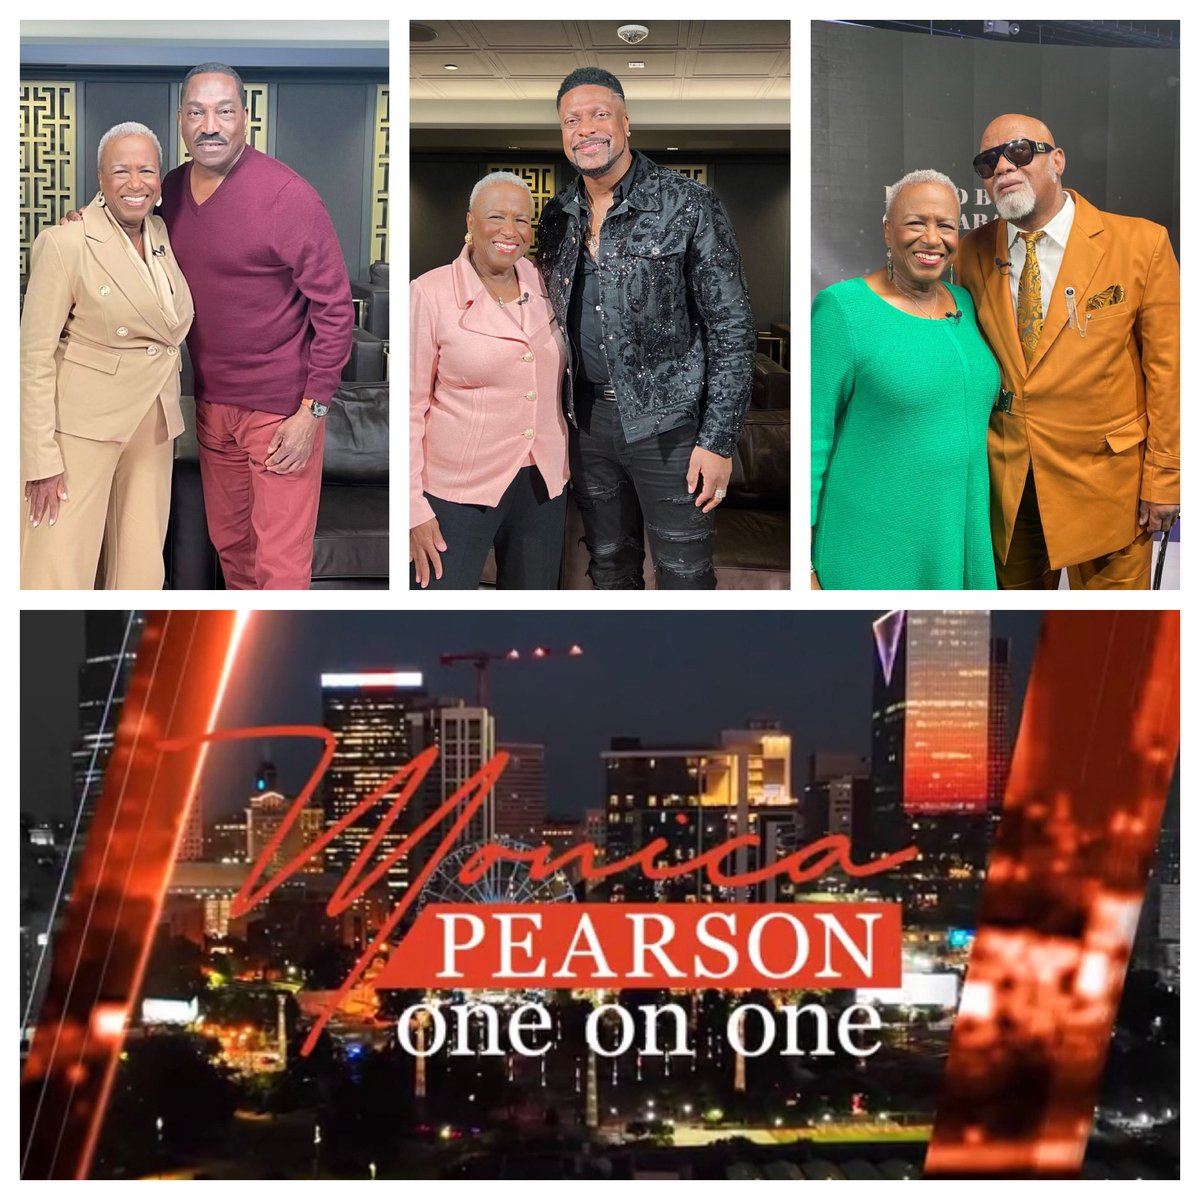 Actor, Clifton Powell, actor/comic, Chris Tucker and Ricky McKinnie of the Blind Boys of Alabama are my guests Sunday at 6 on PeachtreeTV and streaming on ANF+. Hope you can join us for Monica Pearson One on One!